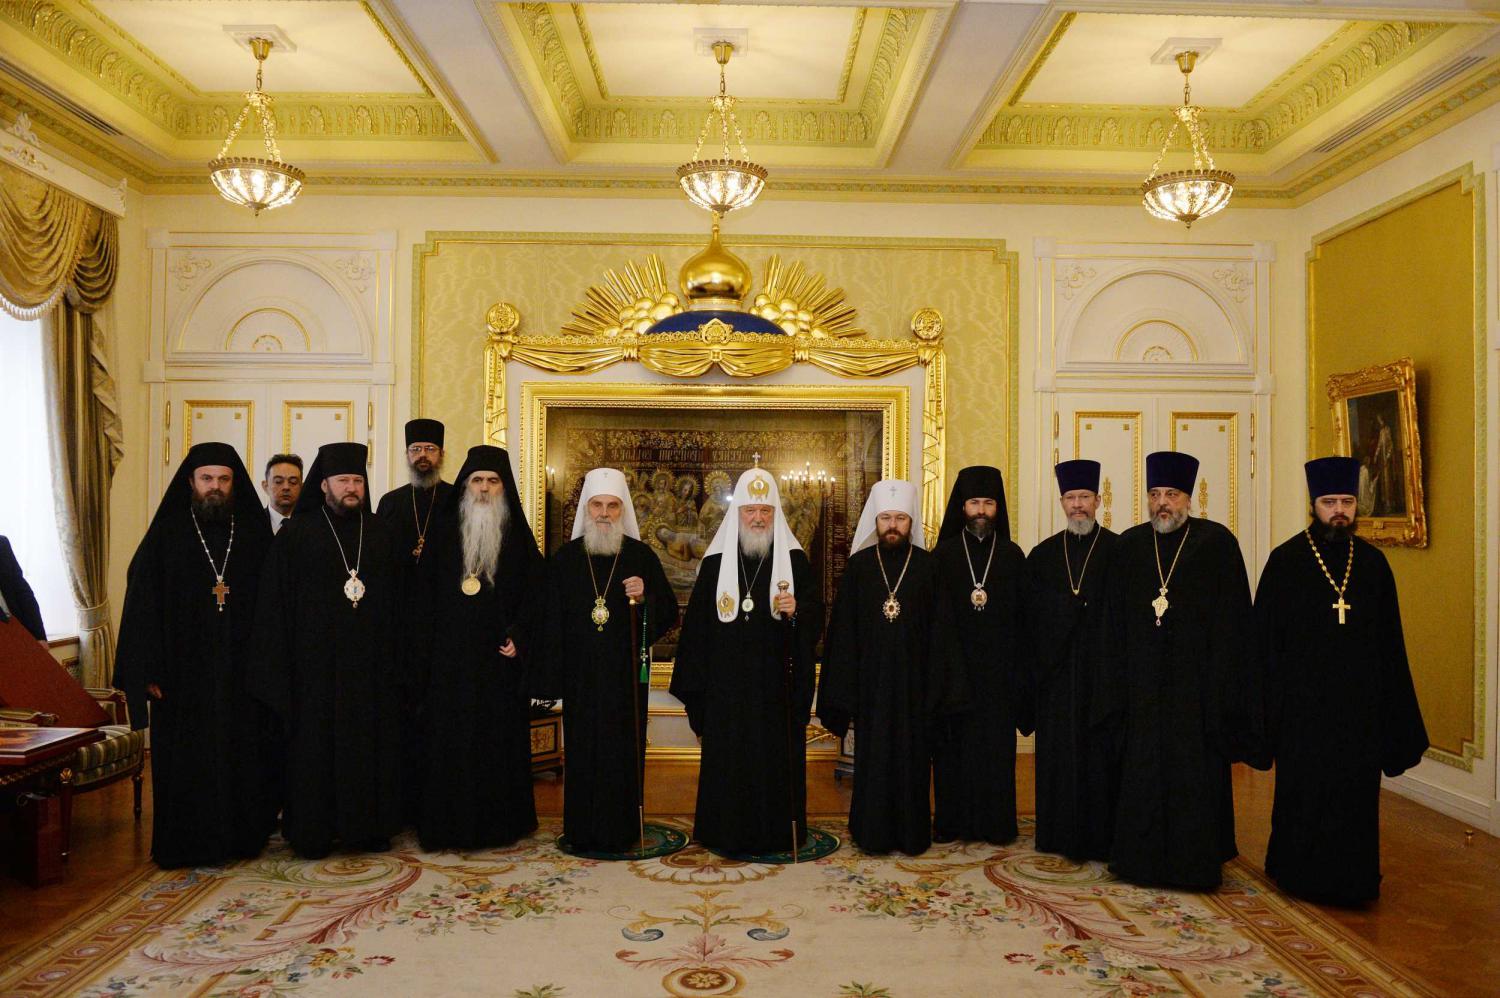 Patriarch Kirill of Moscow and All Russia meets with Serbian Patriarch Irinej